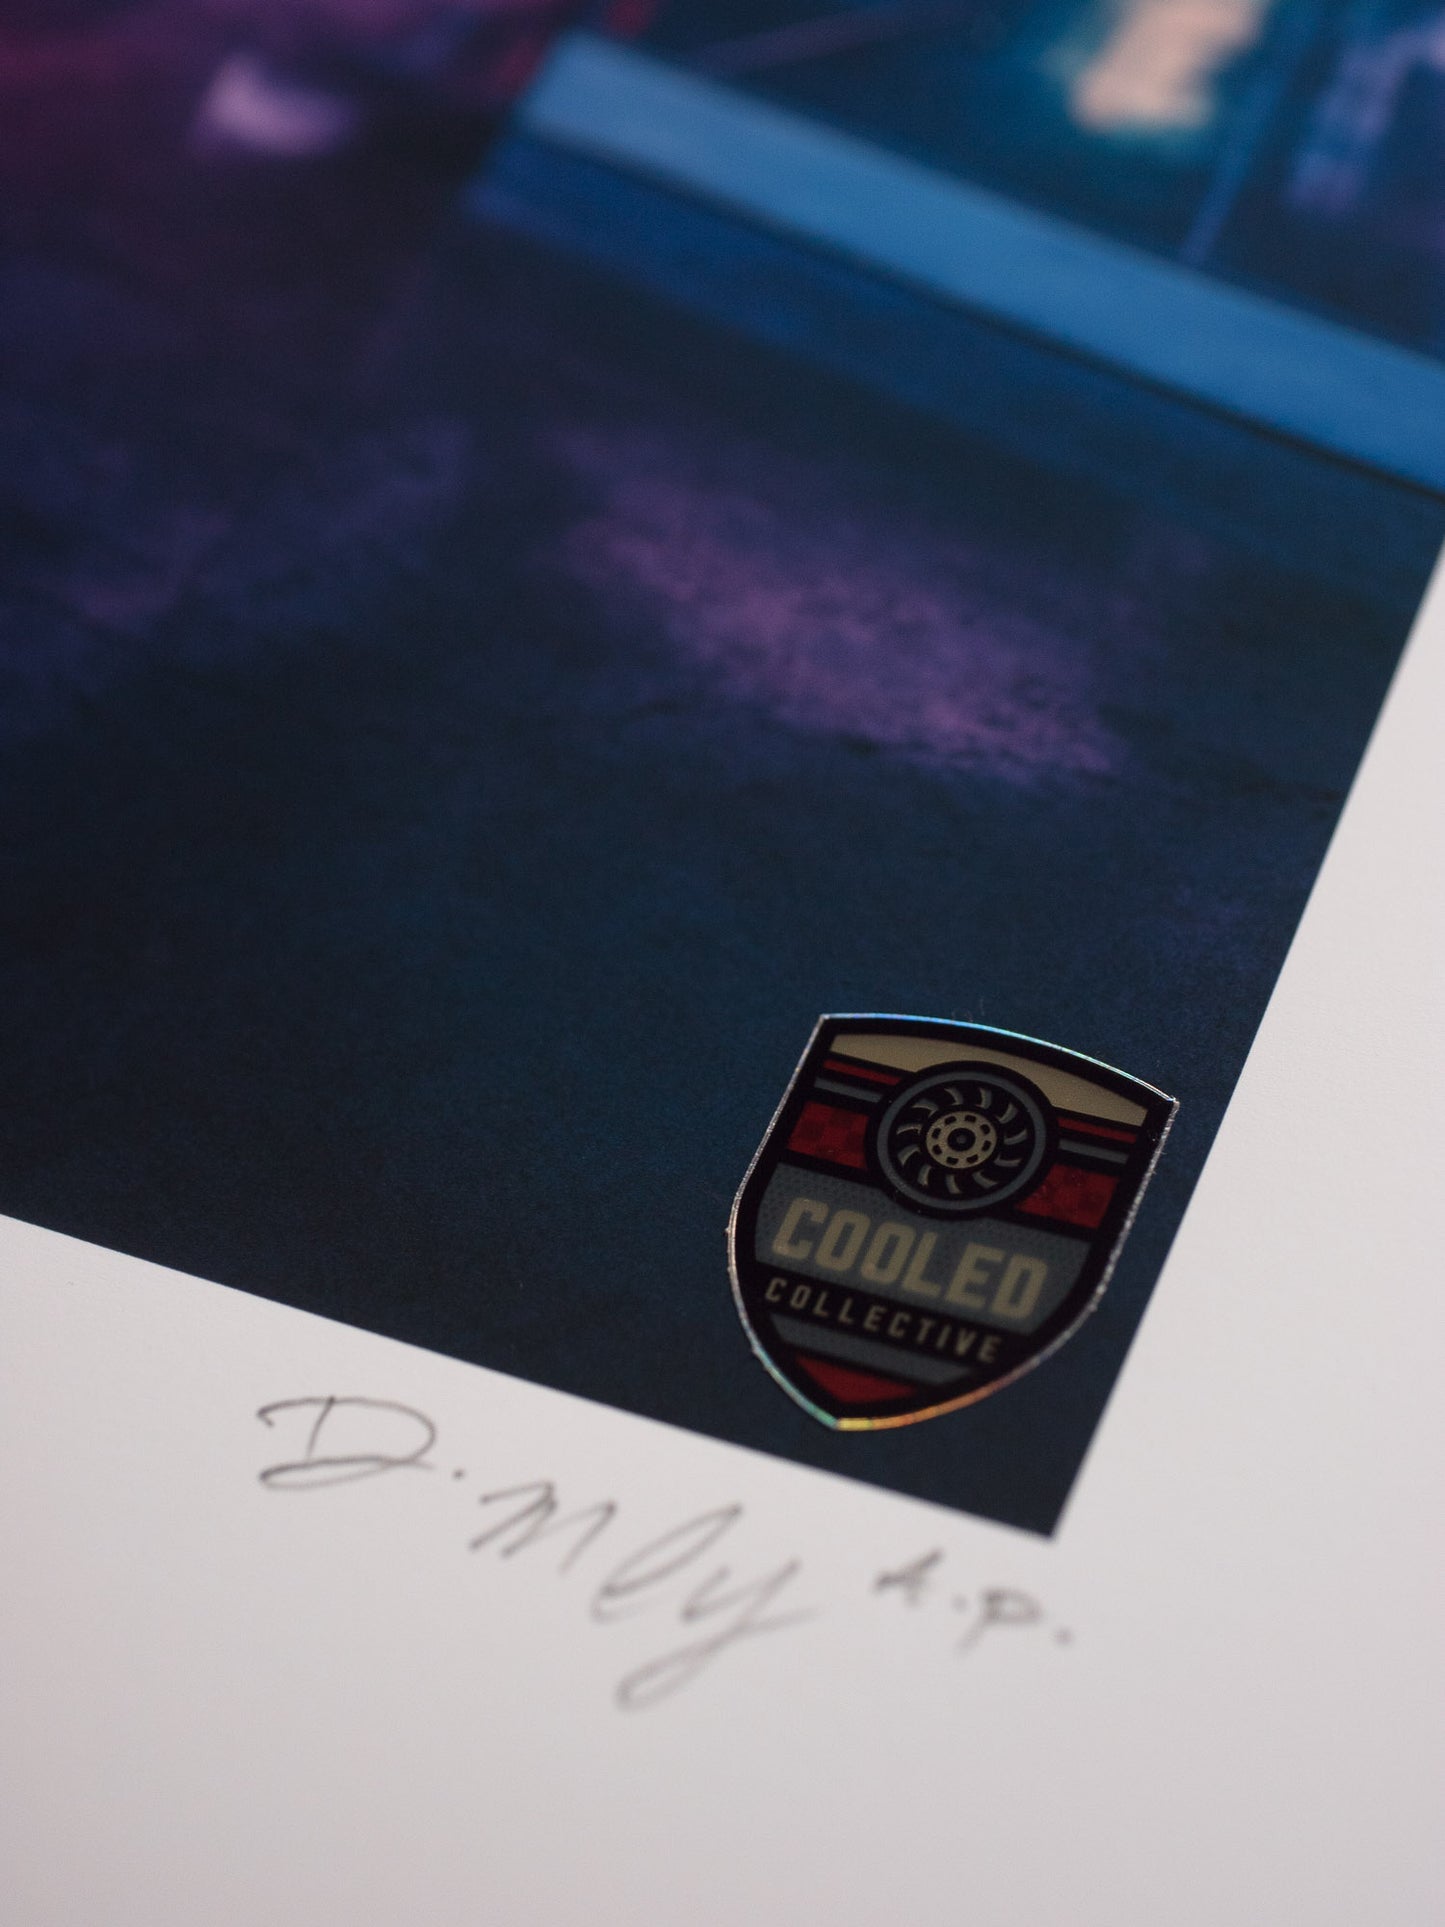 #012 Signature Series Limited Poster - "90s Dream Garage"